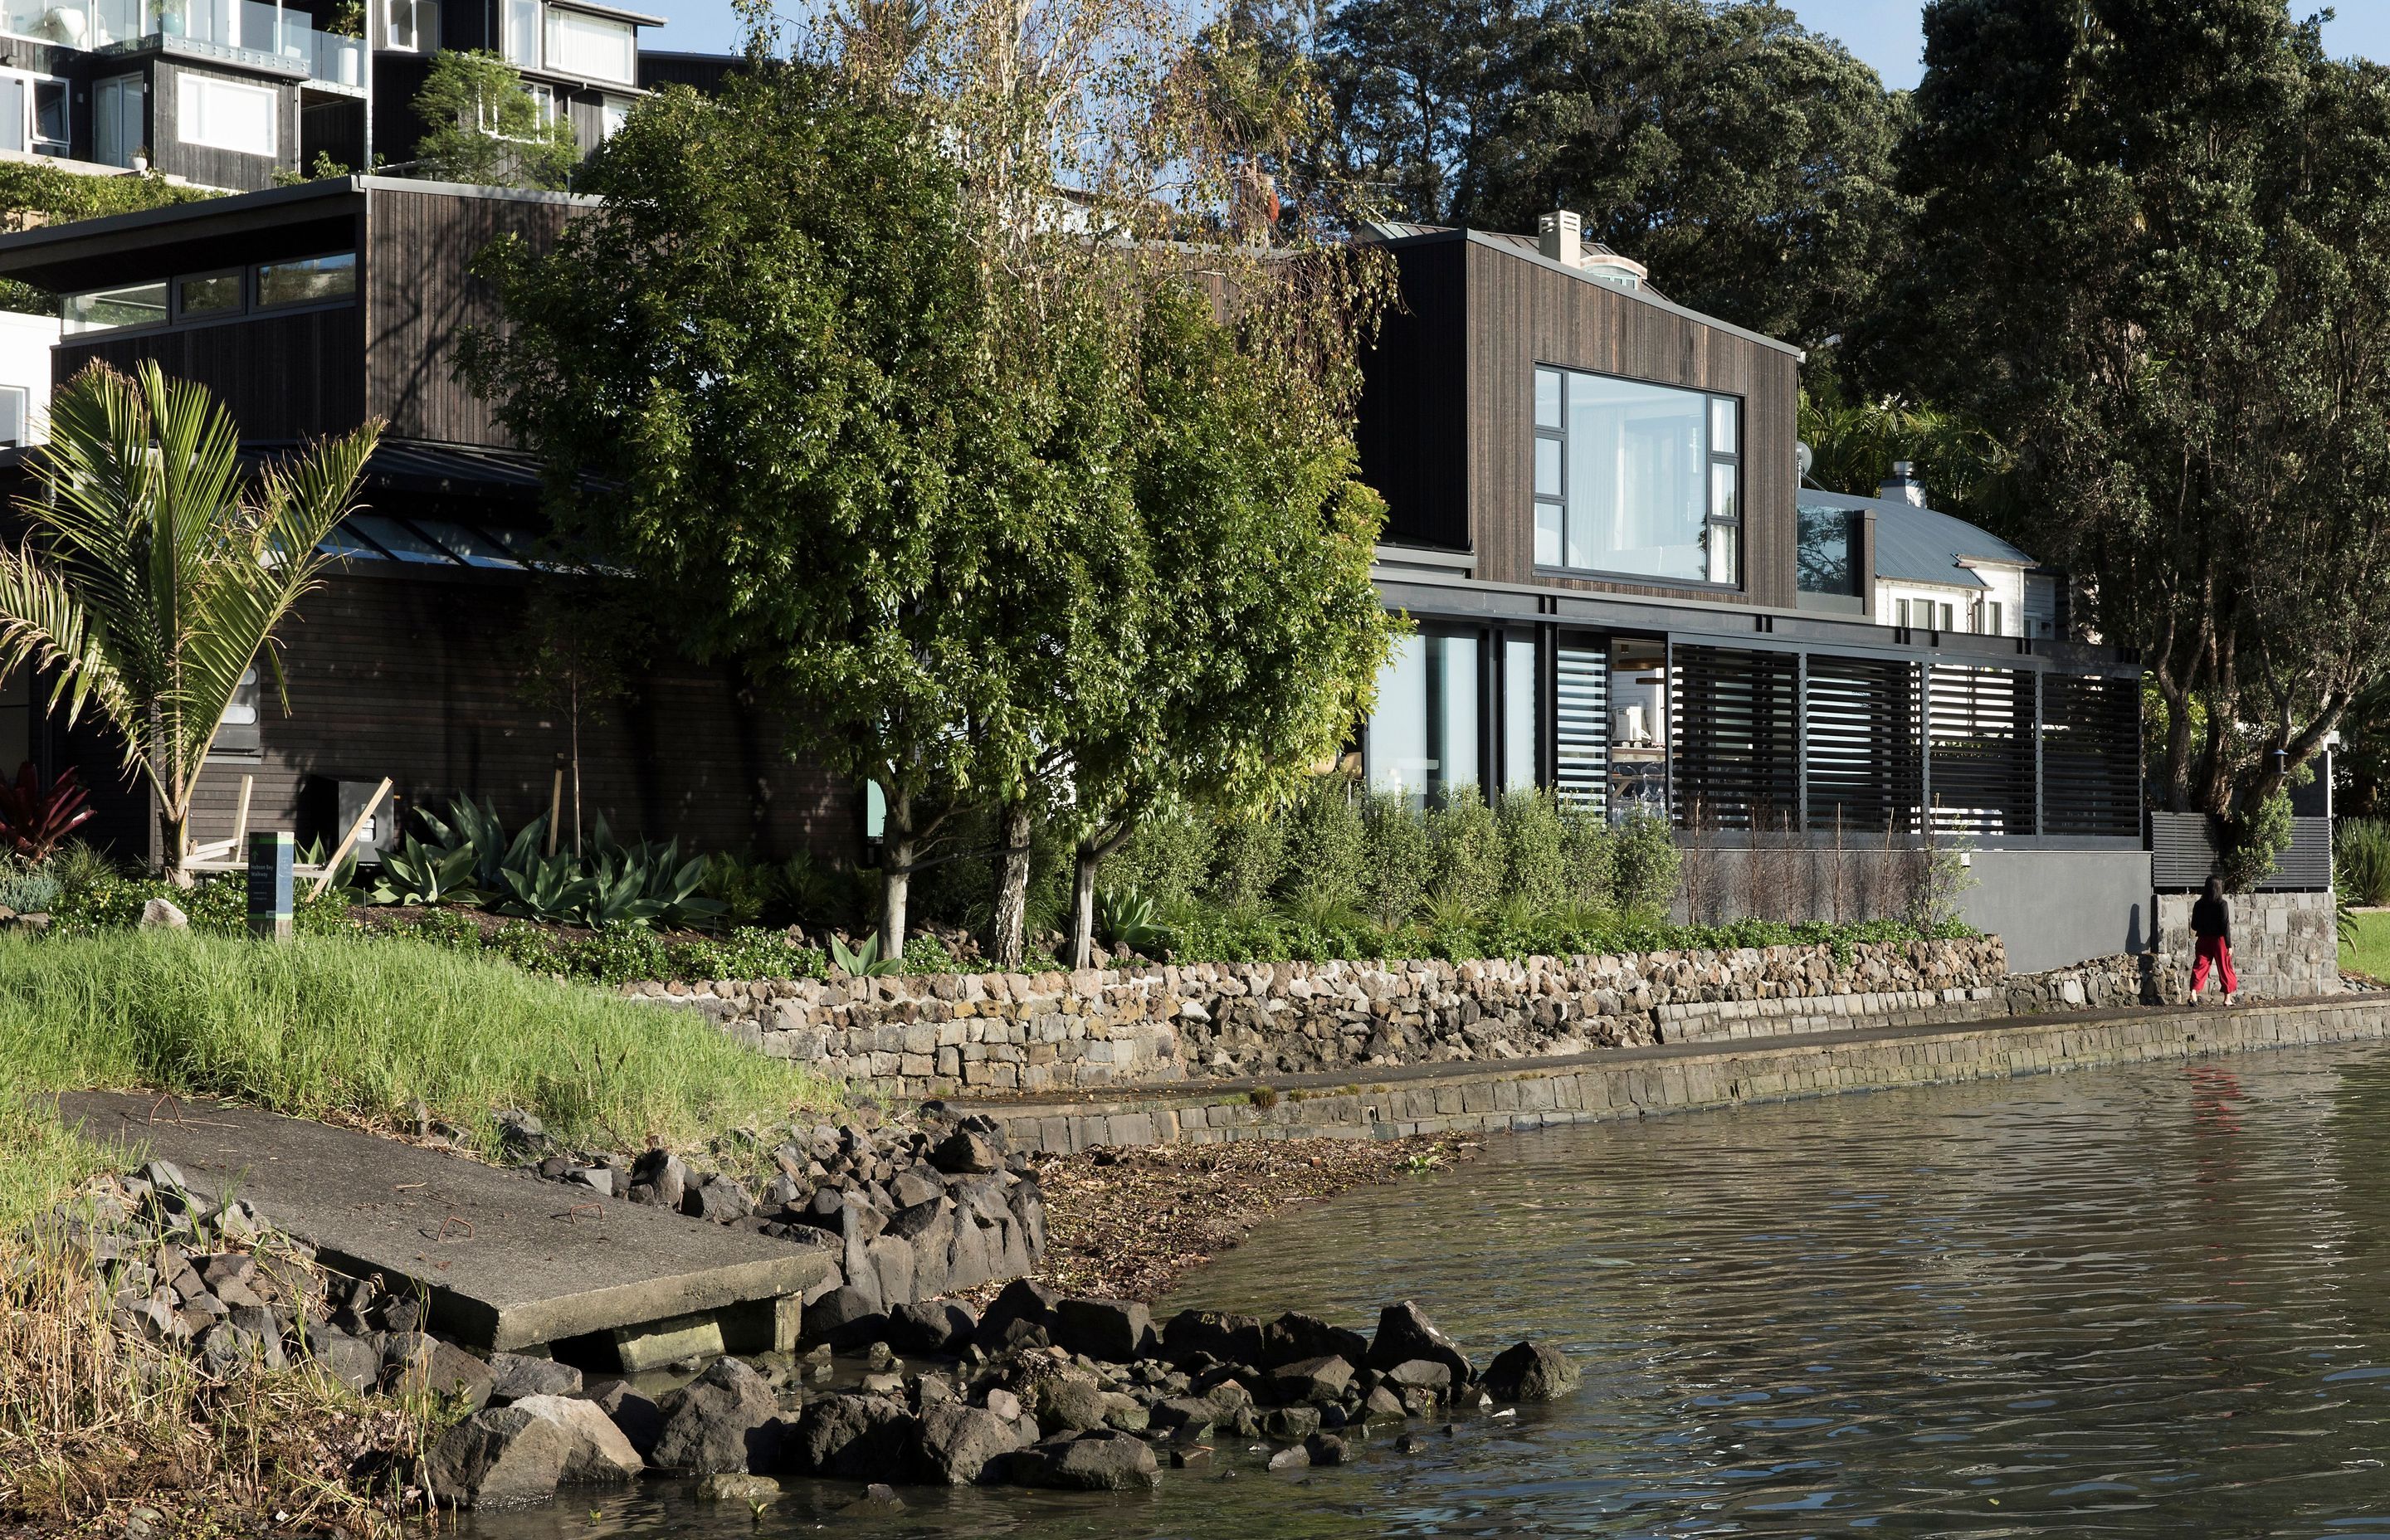 The house sits right on the water and is overlooked by houses above, making the roof a fifth elevation for the architects to consider.